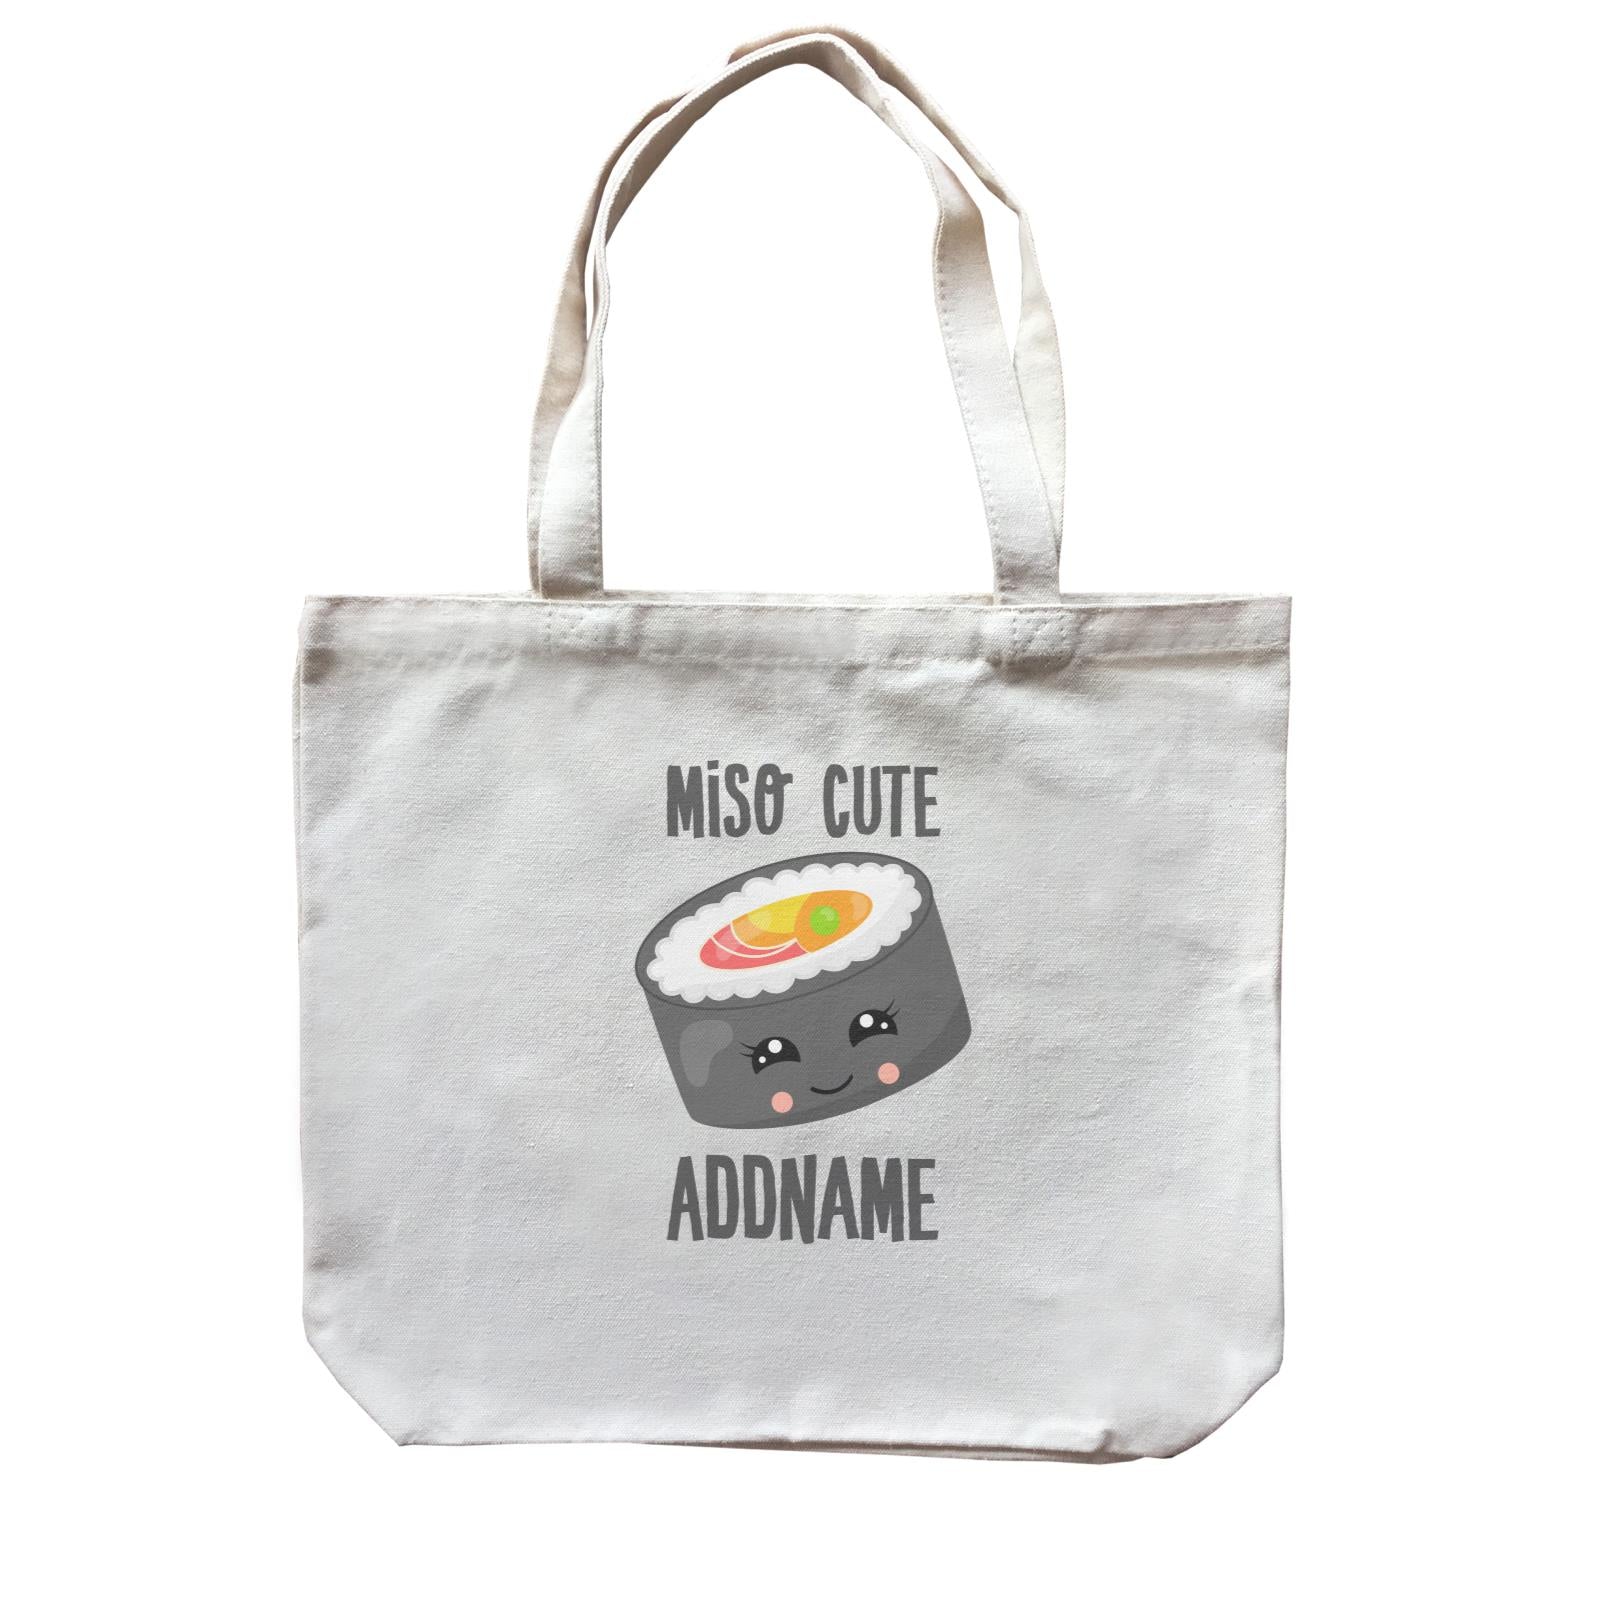 Miso Cute Sushi Circle Roll Addname Canvas Bag